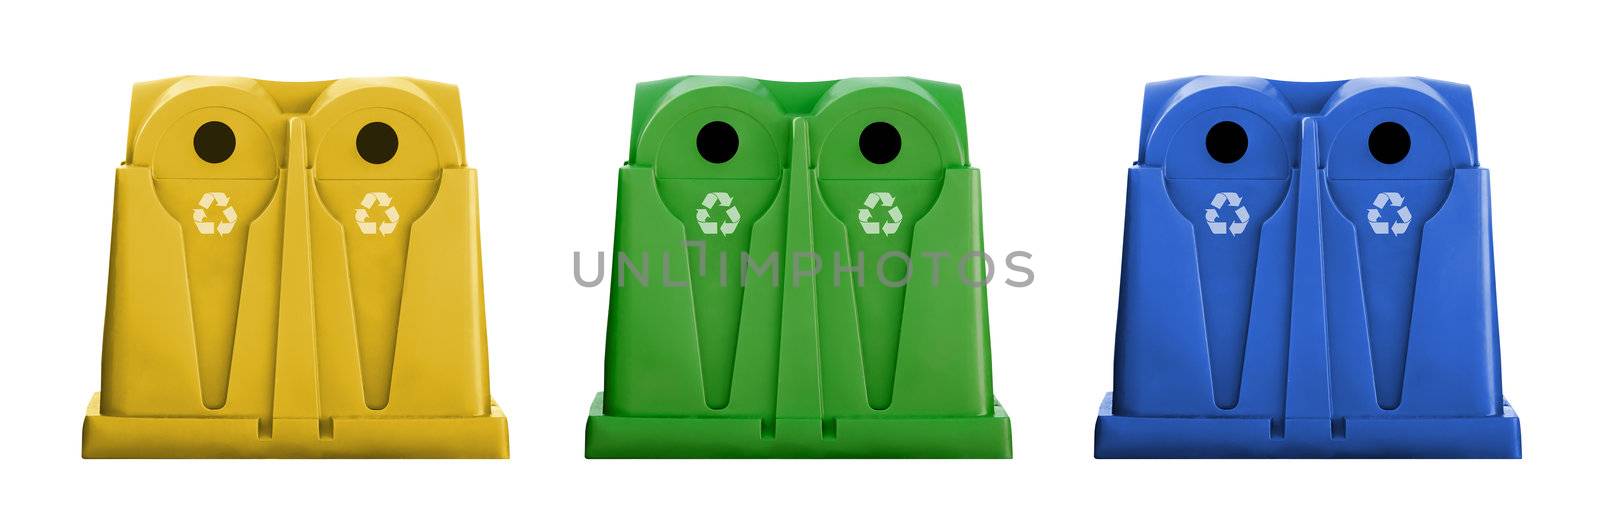 Recycle containers for glass, metal, plastic and paper waste isolated on white background